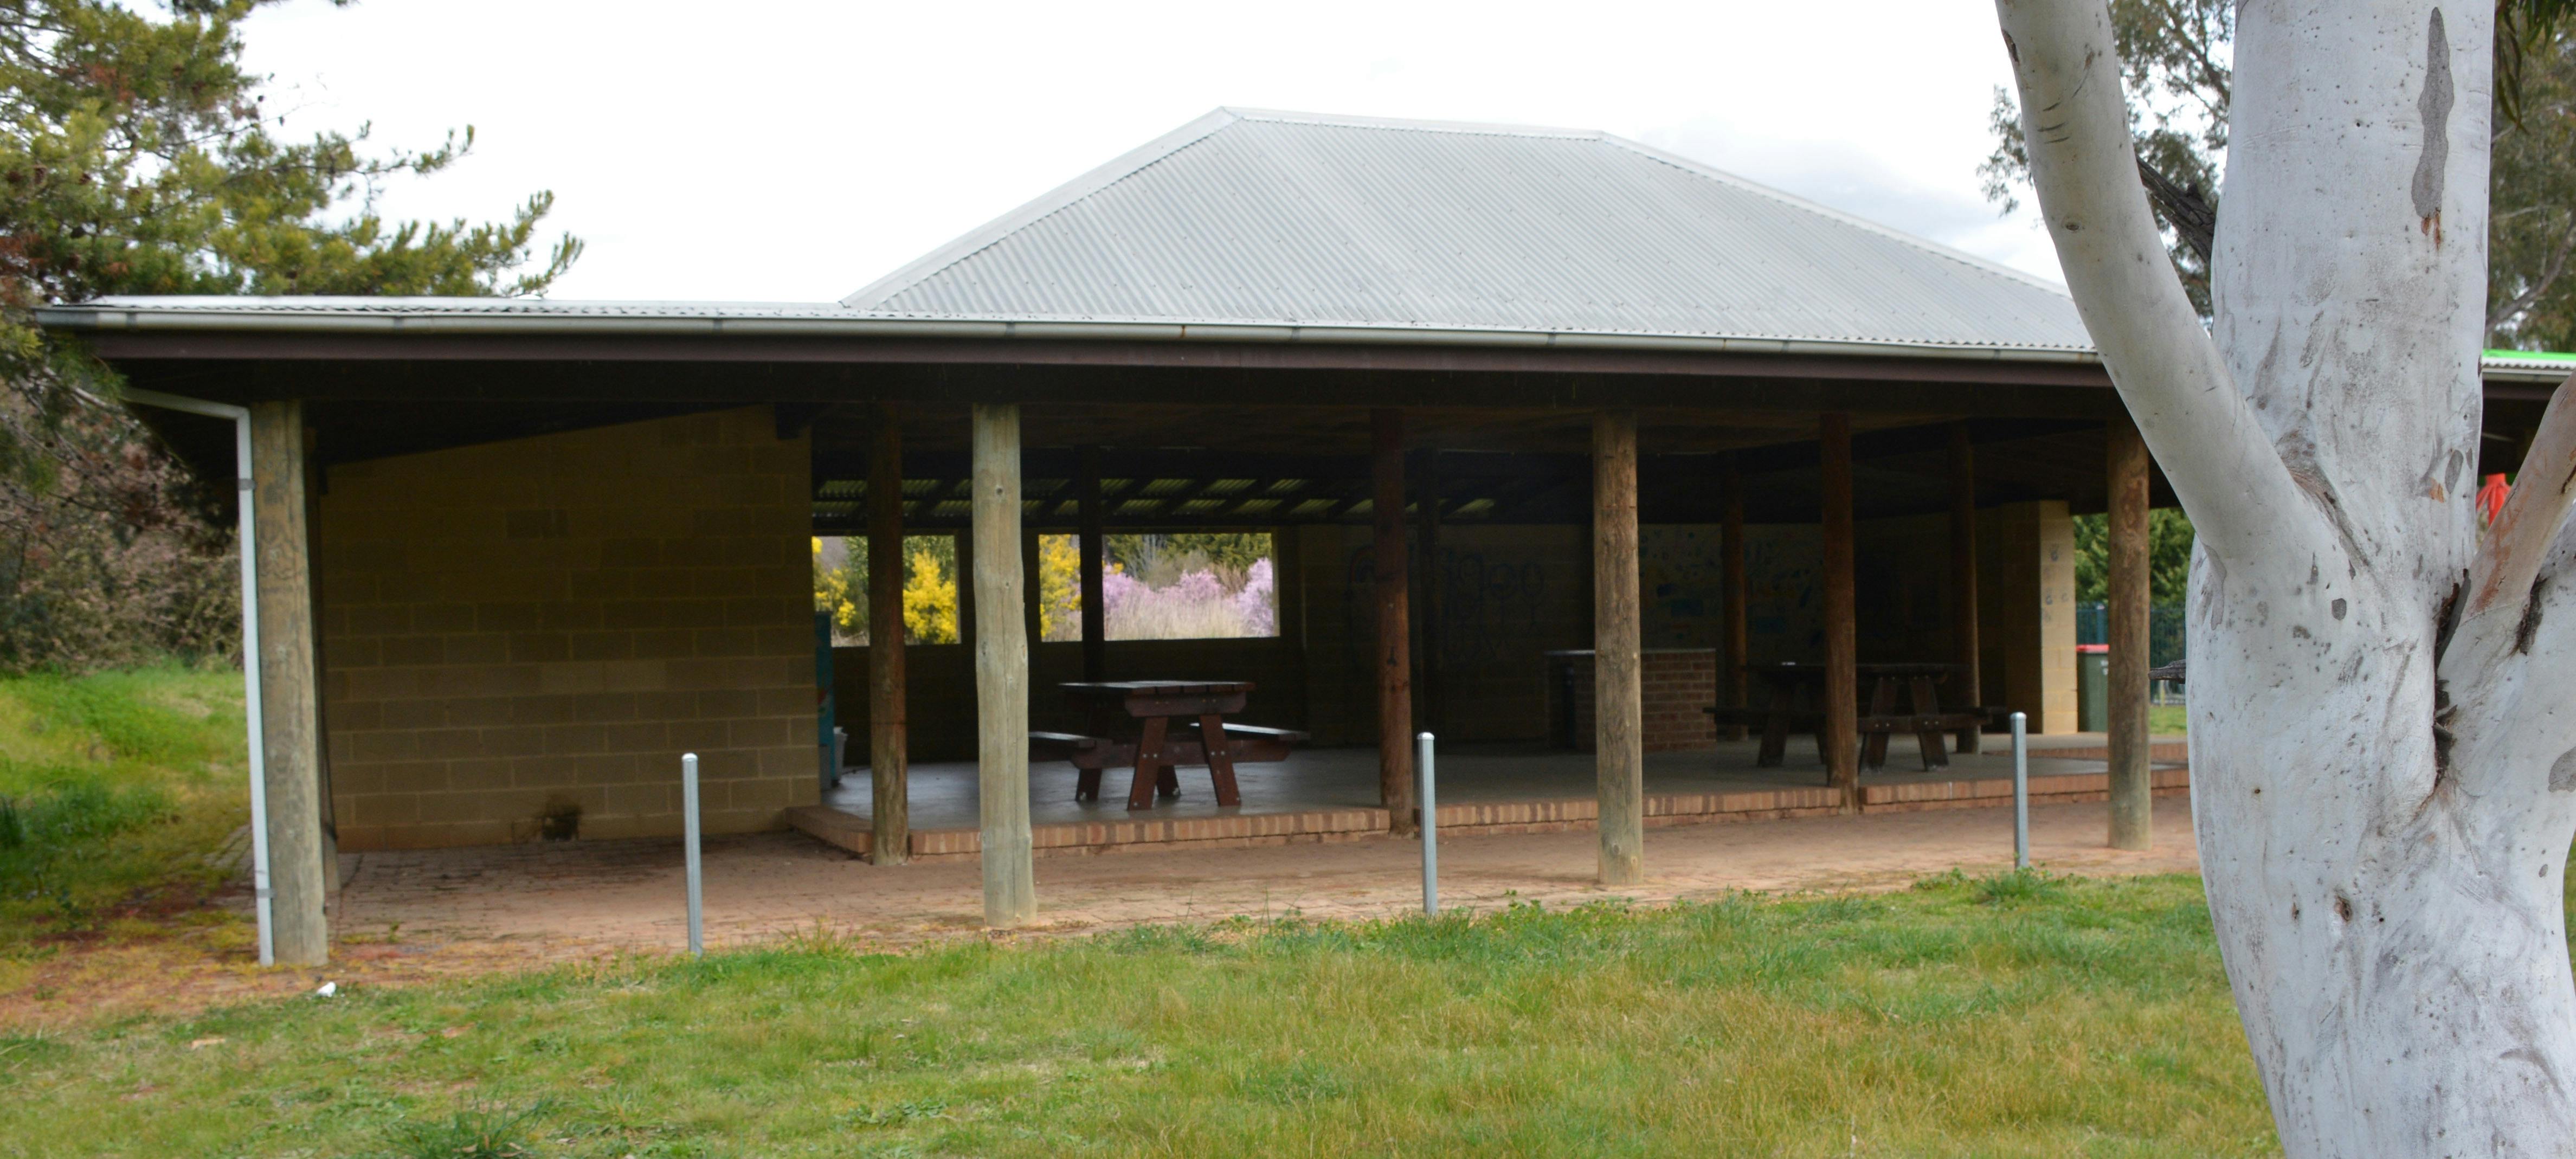 Clifton Grove mud hut. The Masterplan makes a number of suggestion about improving the area around the Mud Hut, including a fire pit and improved landscaping.